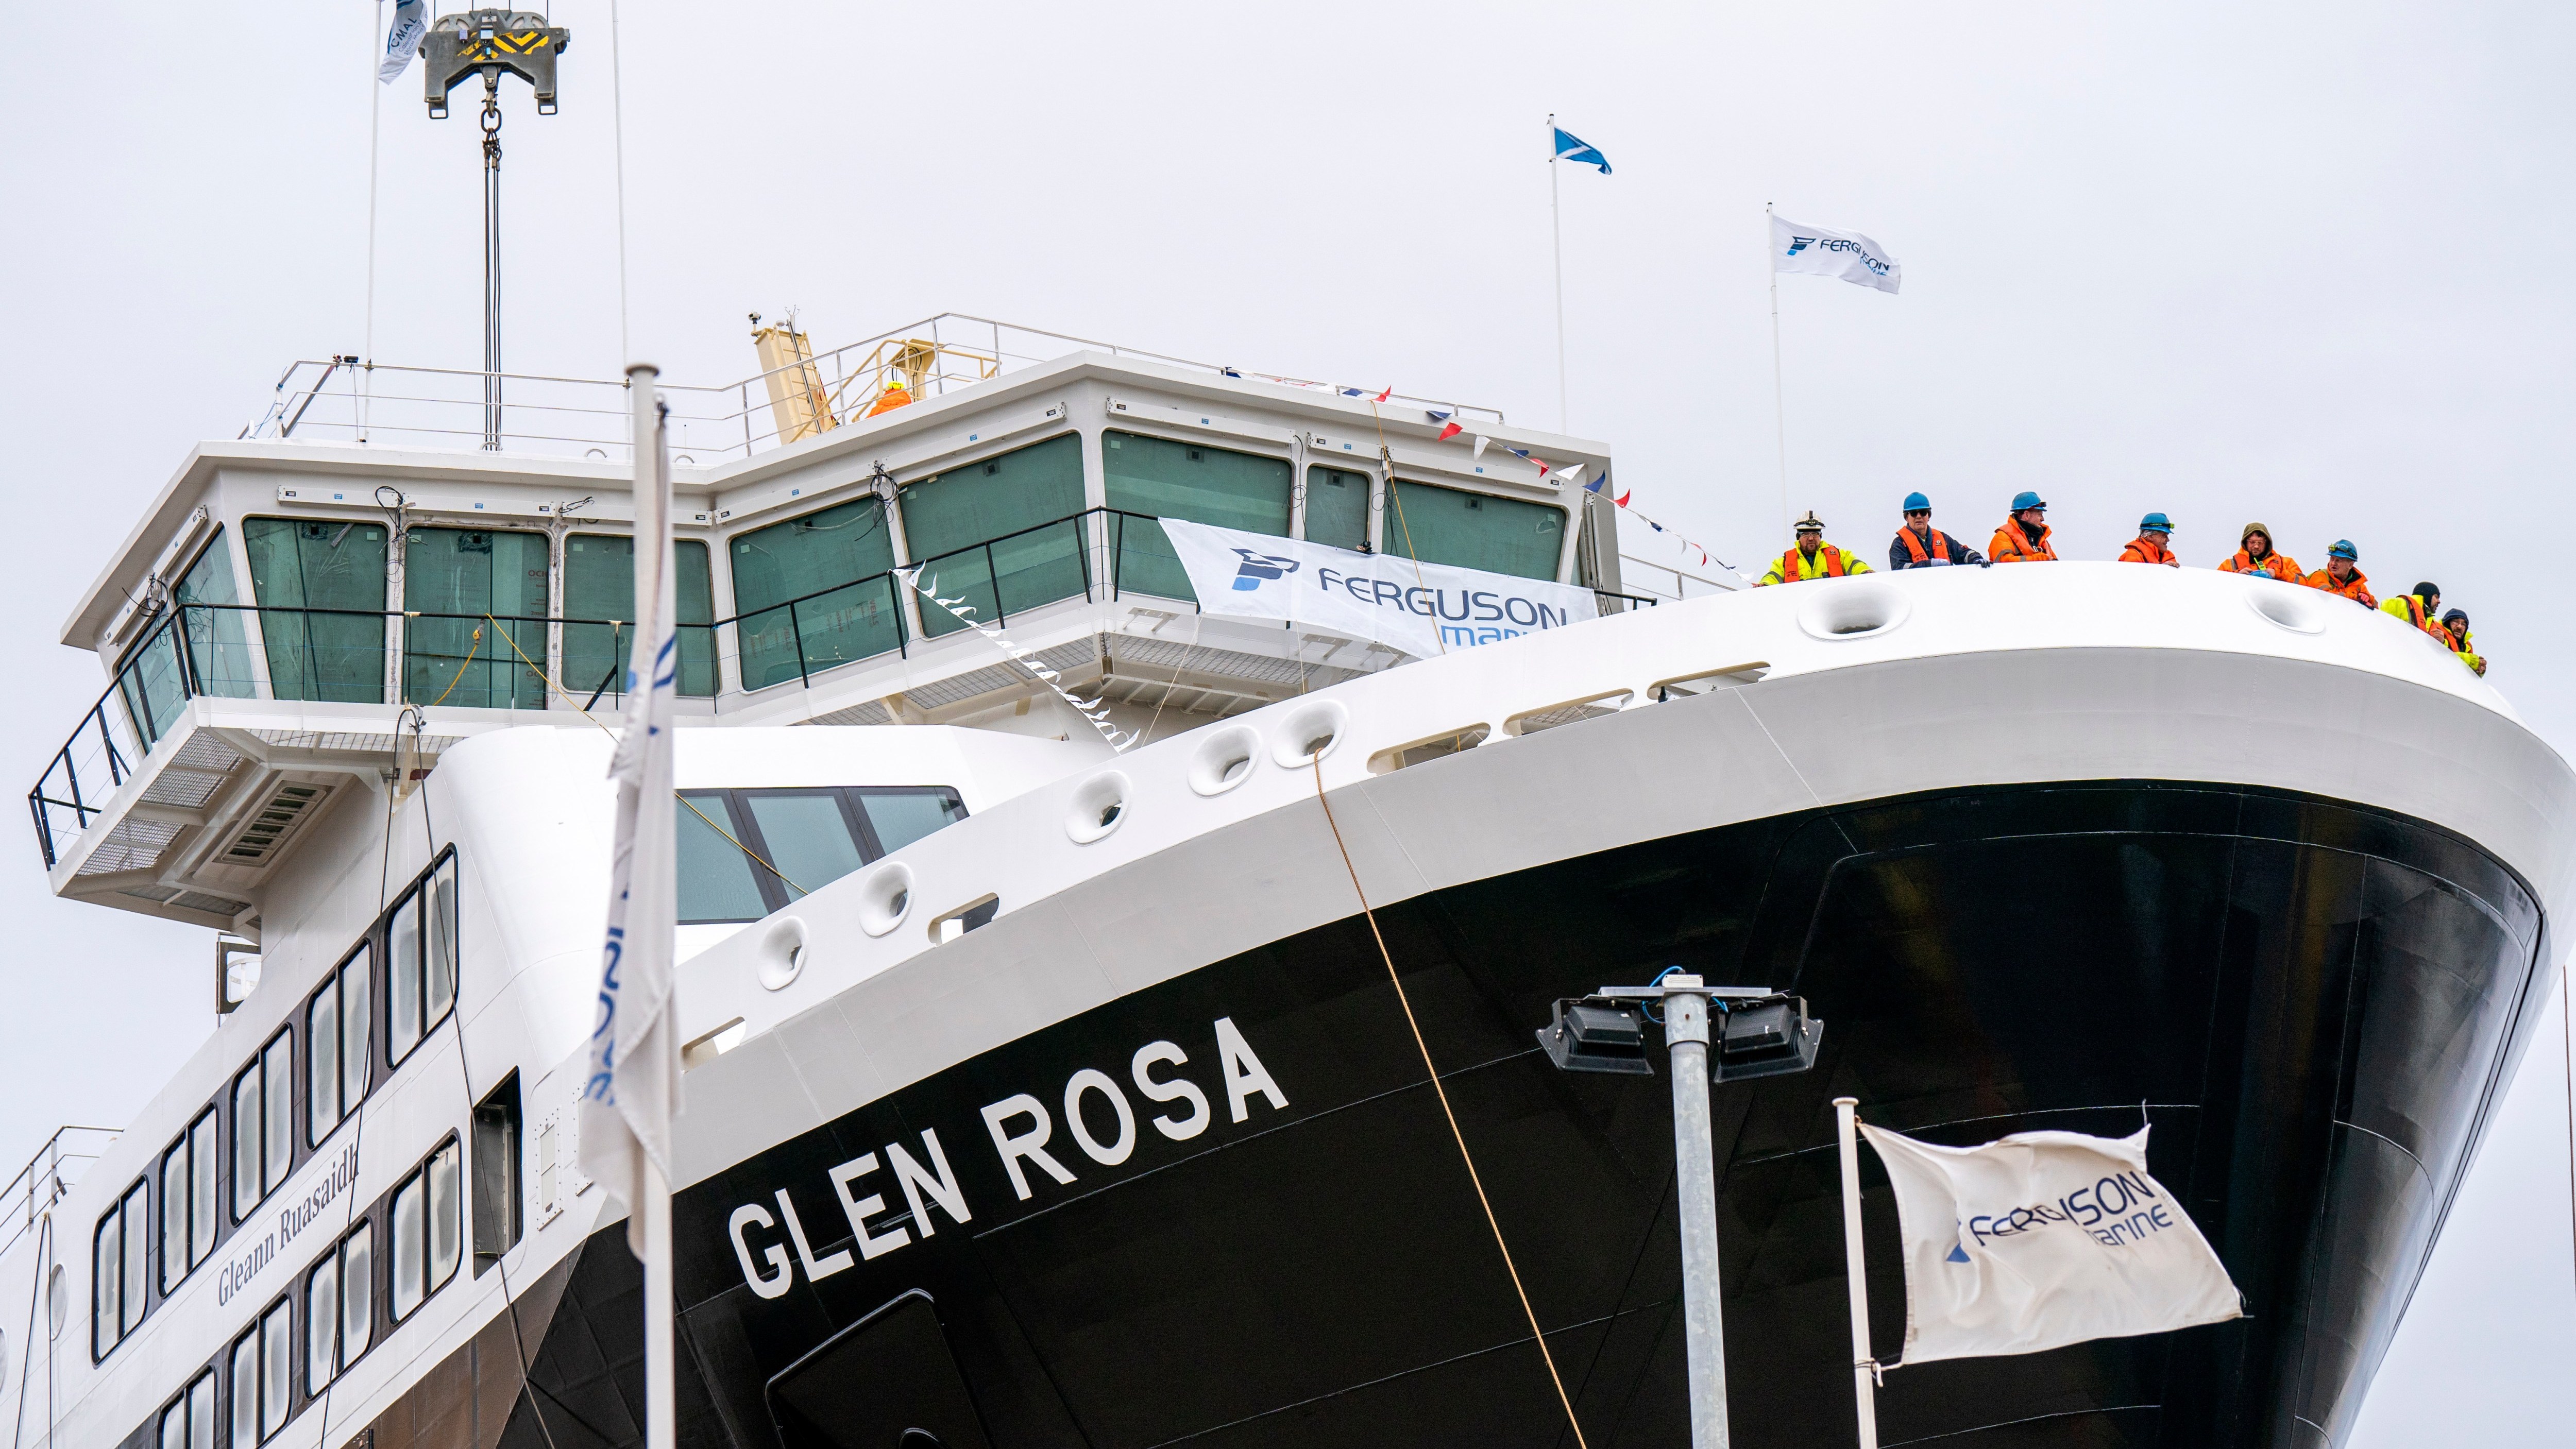 The Glen Rosa, which along with its sister ship Glen Sannox, has cost three times the original budget of £97 million